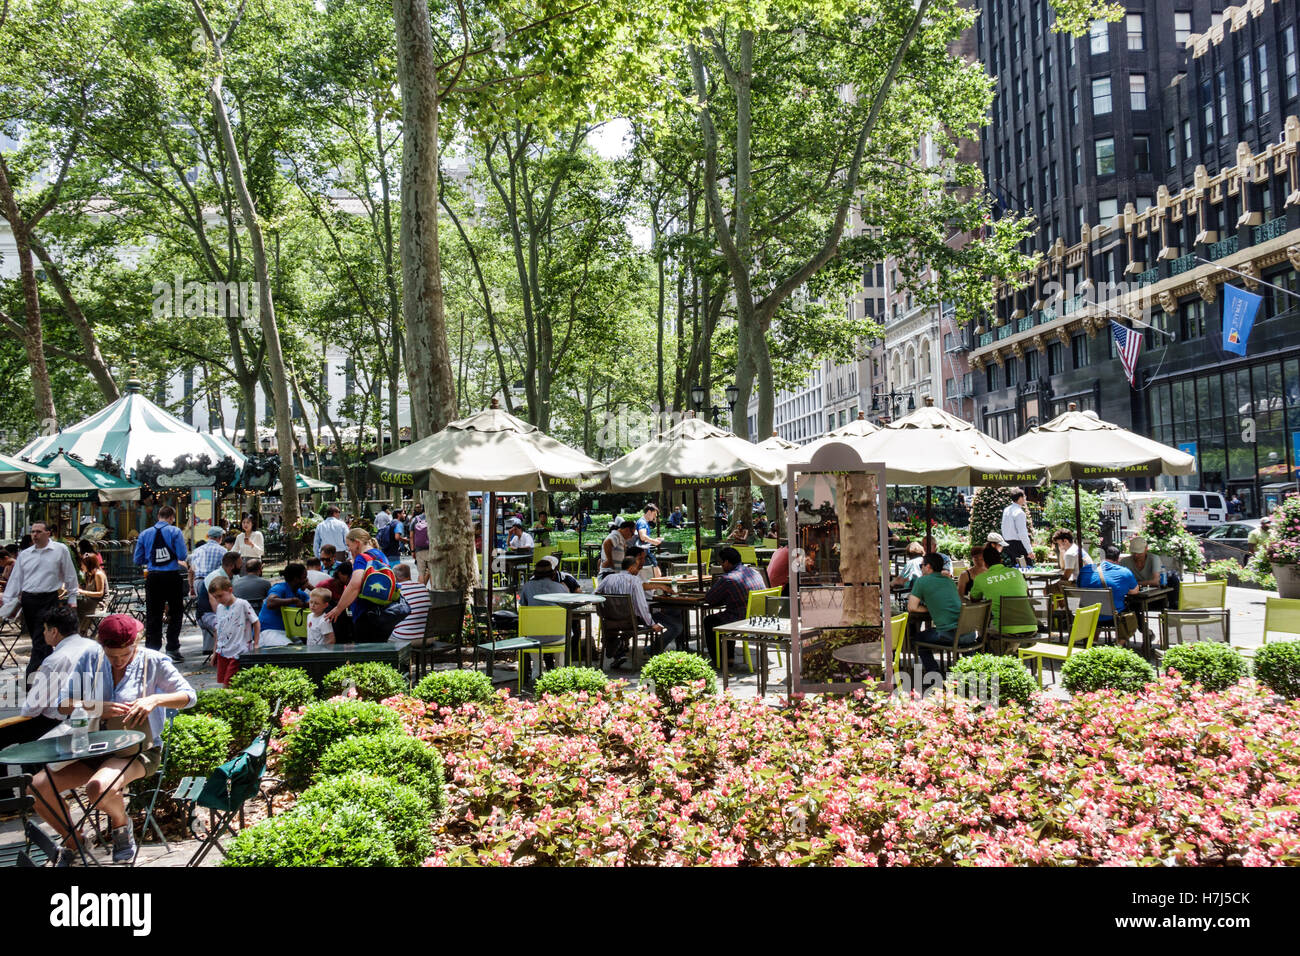 New York City,NY NYC Manhattan,Midtown,Bryant Park,public park,tabletop games,seating,umbrellas,flower bed,trees,adult,adults,man men male,woman femal Stock Photo